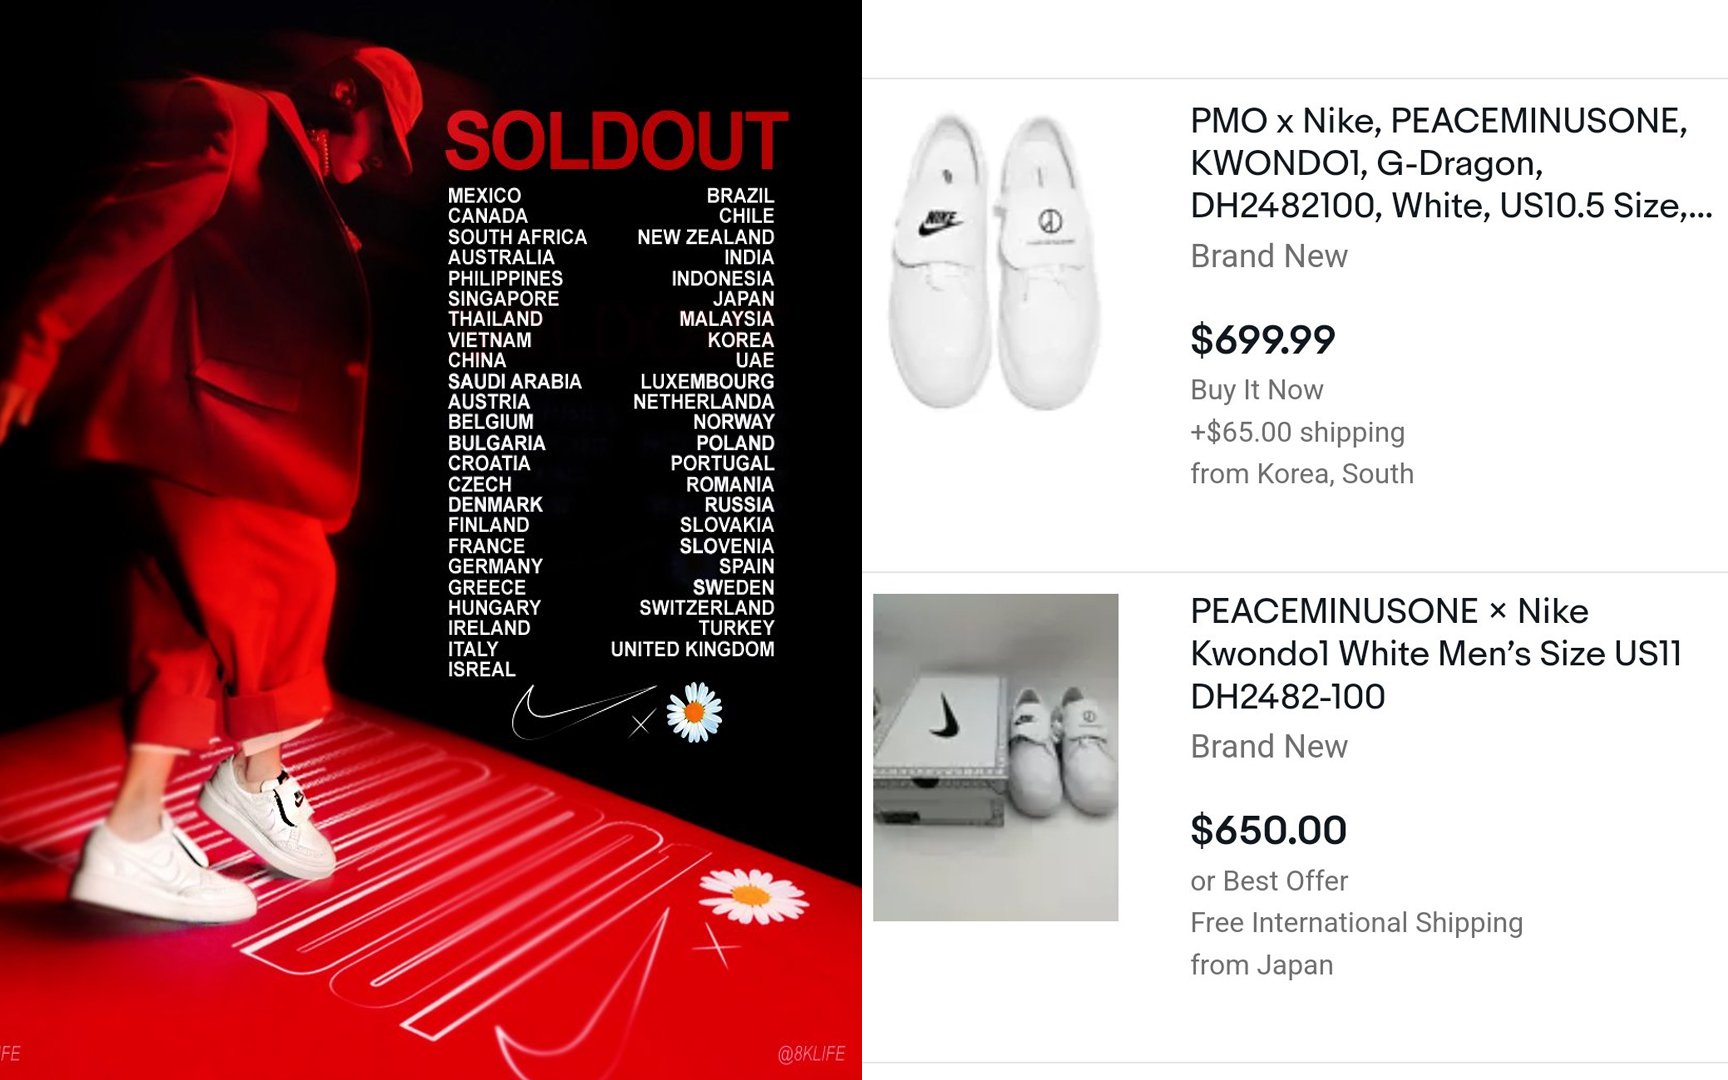 Federal Pasivo Hecho para recordar G-Dragon's﻿ Nike collab shoes KWONDO1 sold out everywhere and reselling for  high prices on eBay | allkpop